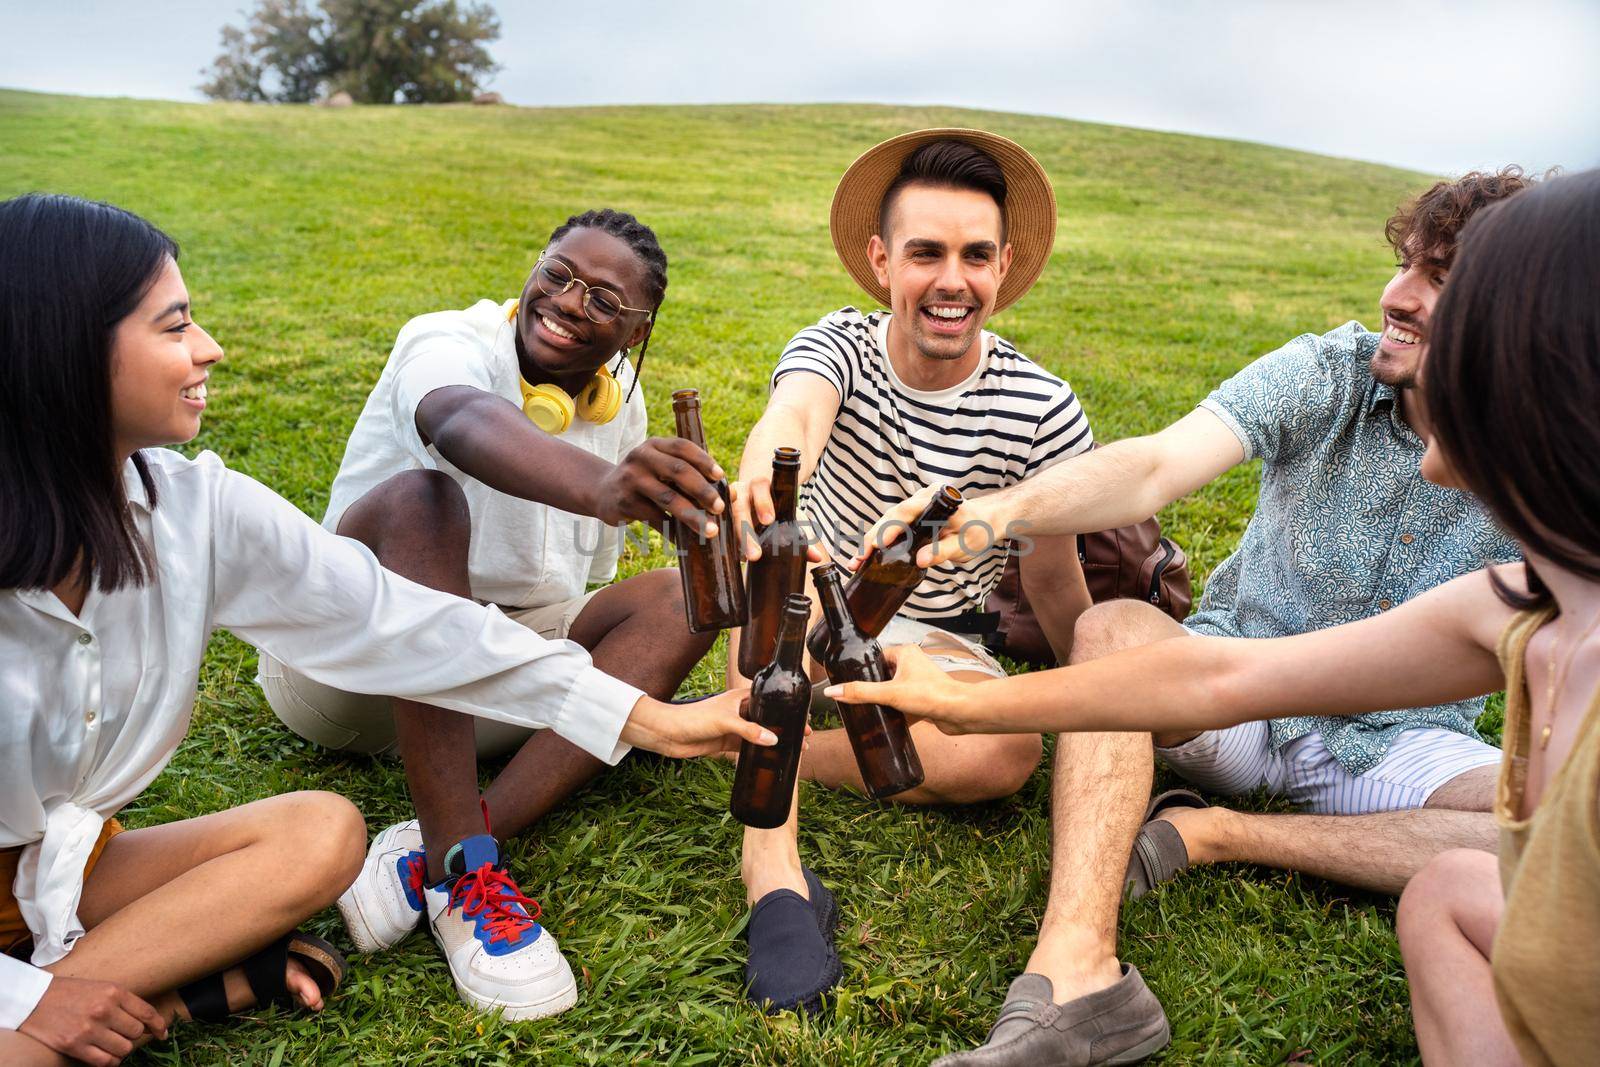 Multiracial happy and smiling friends having fun together in a park toasting with beers. Friendship concept.